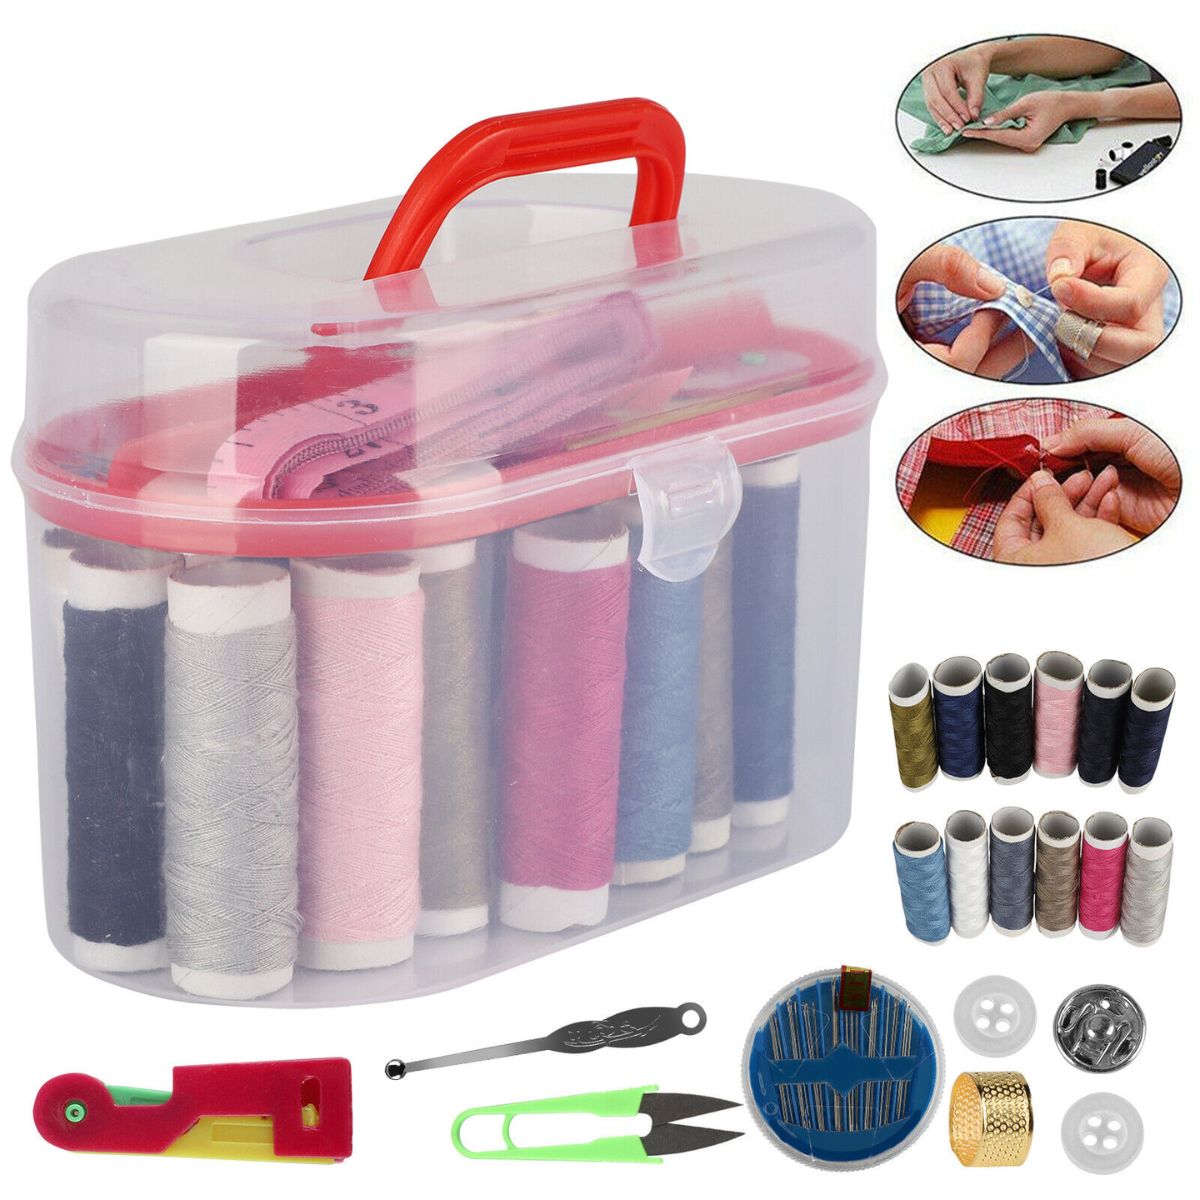 Travel Sewing Kit with Thread, Needles, Scissors, and Storage Box